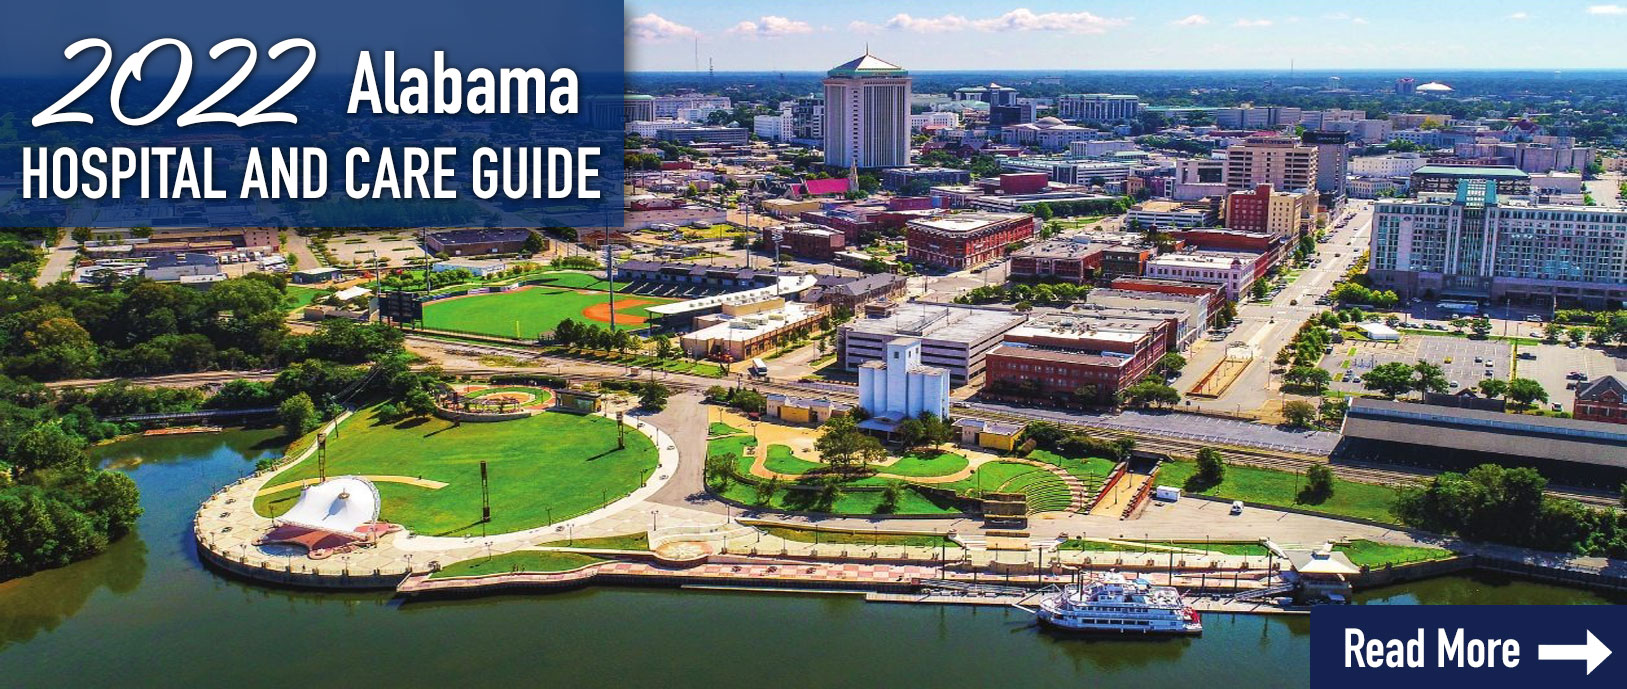 Banner picture of a drone picture shot up in the air viewing the water, river walk way along the water, a riverboat, a baseball field,  and the city in the distance with lots of nice buildings.

Banner says:

2022 Alabama
HOSPITAL AND CARE GUIDE
READ MORE ->